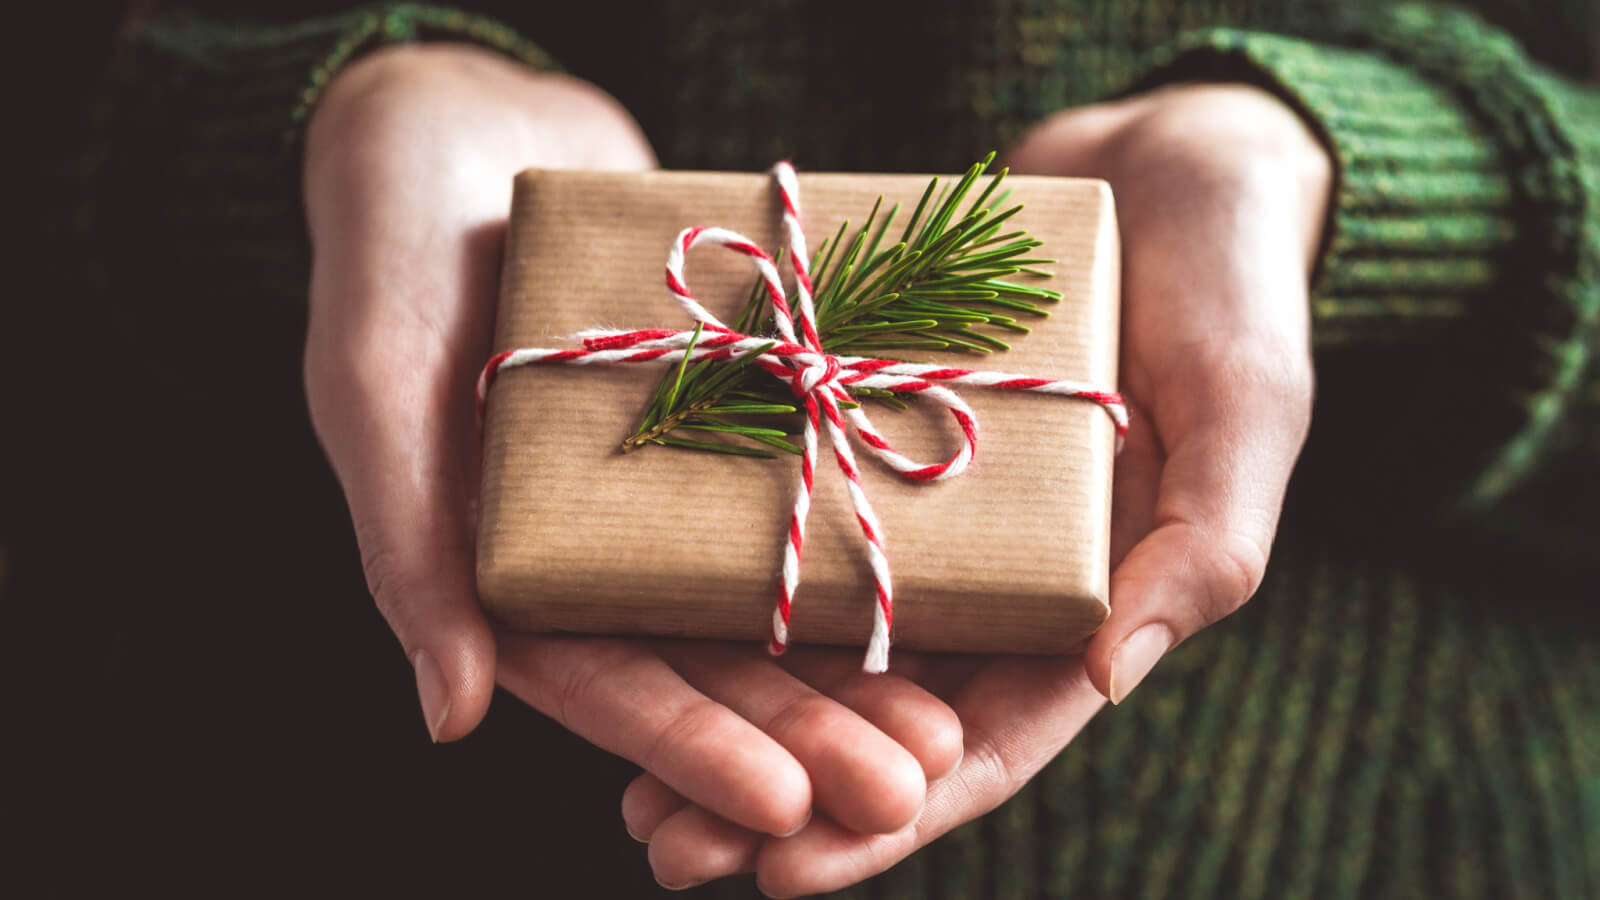 woman's hands holding small wrapped gift